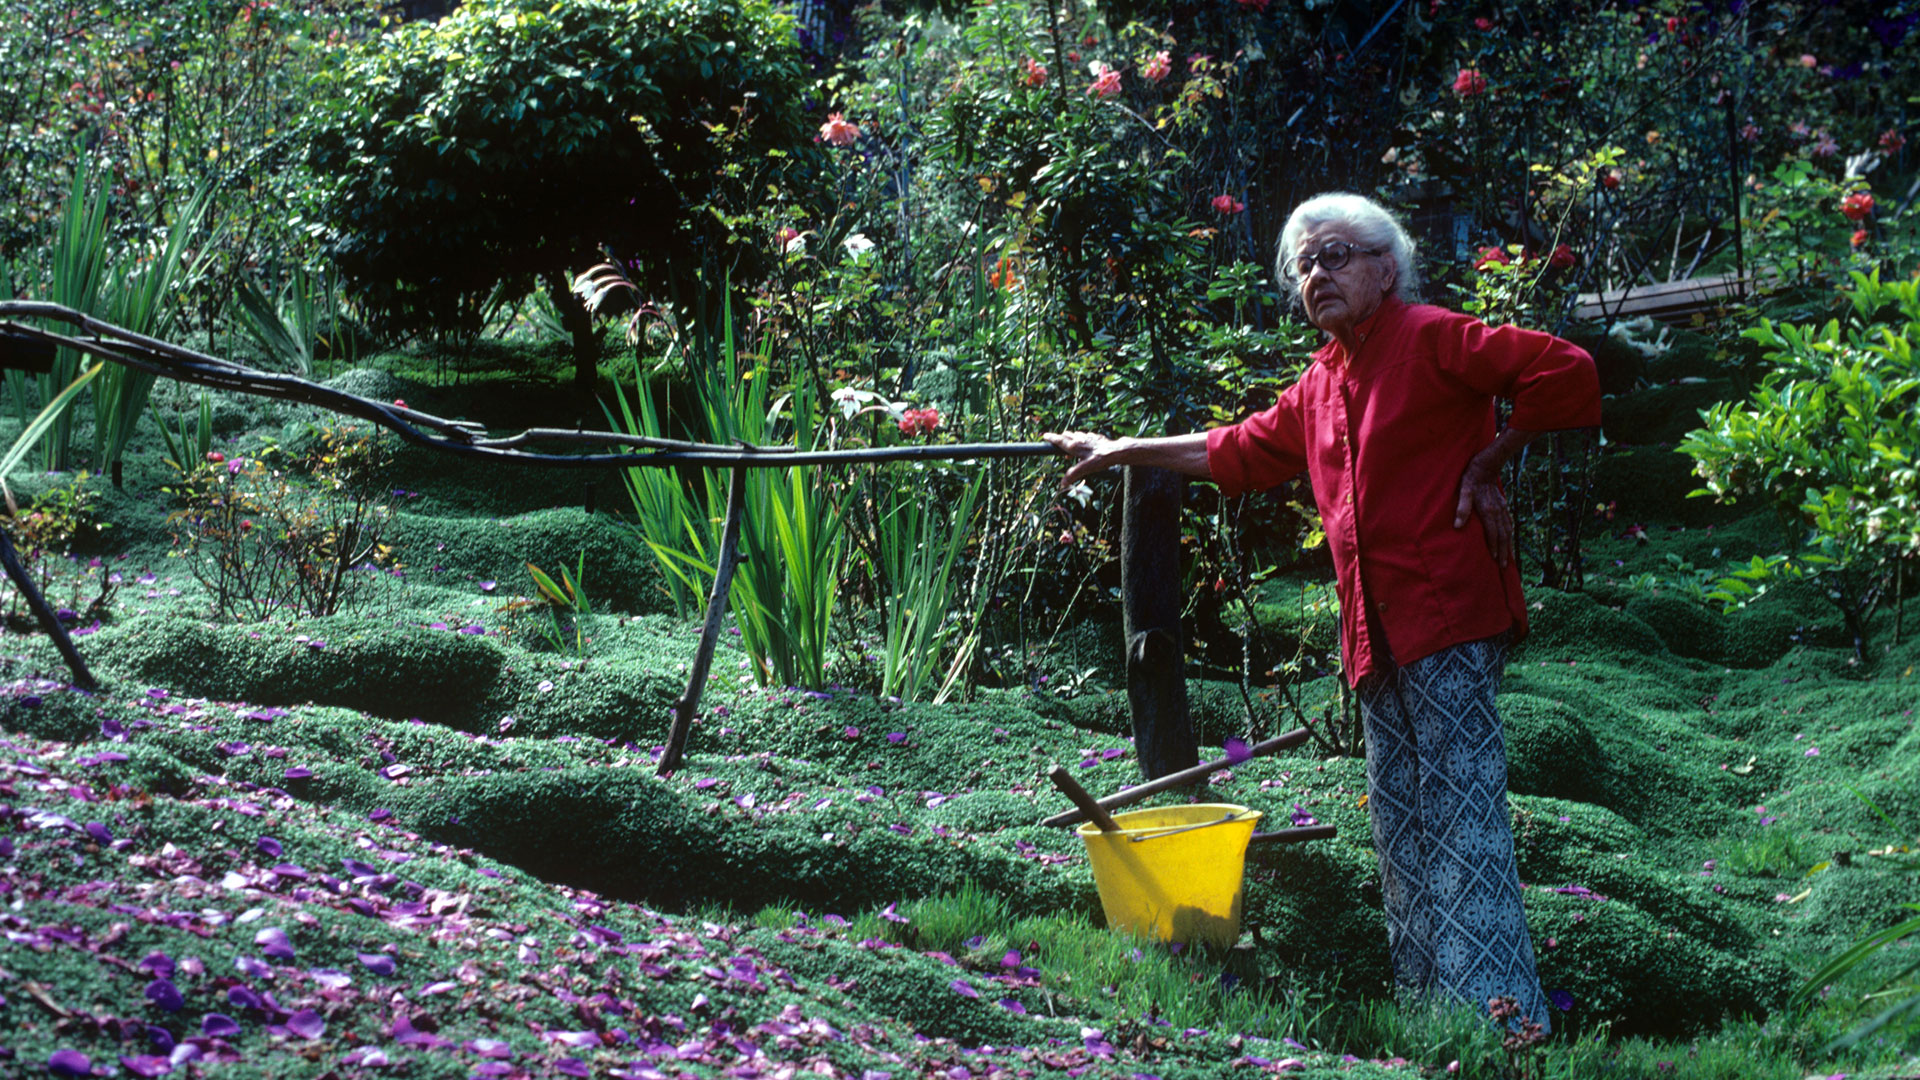 An older woman in lose fitting pants and a red blouse stands with her hand resting on a fence that surrounds a lush green garden stretching out behind her.